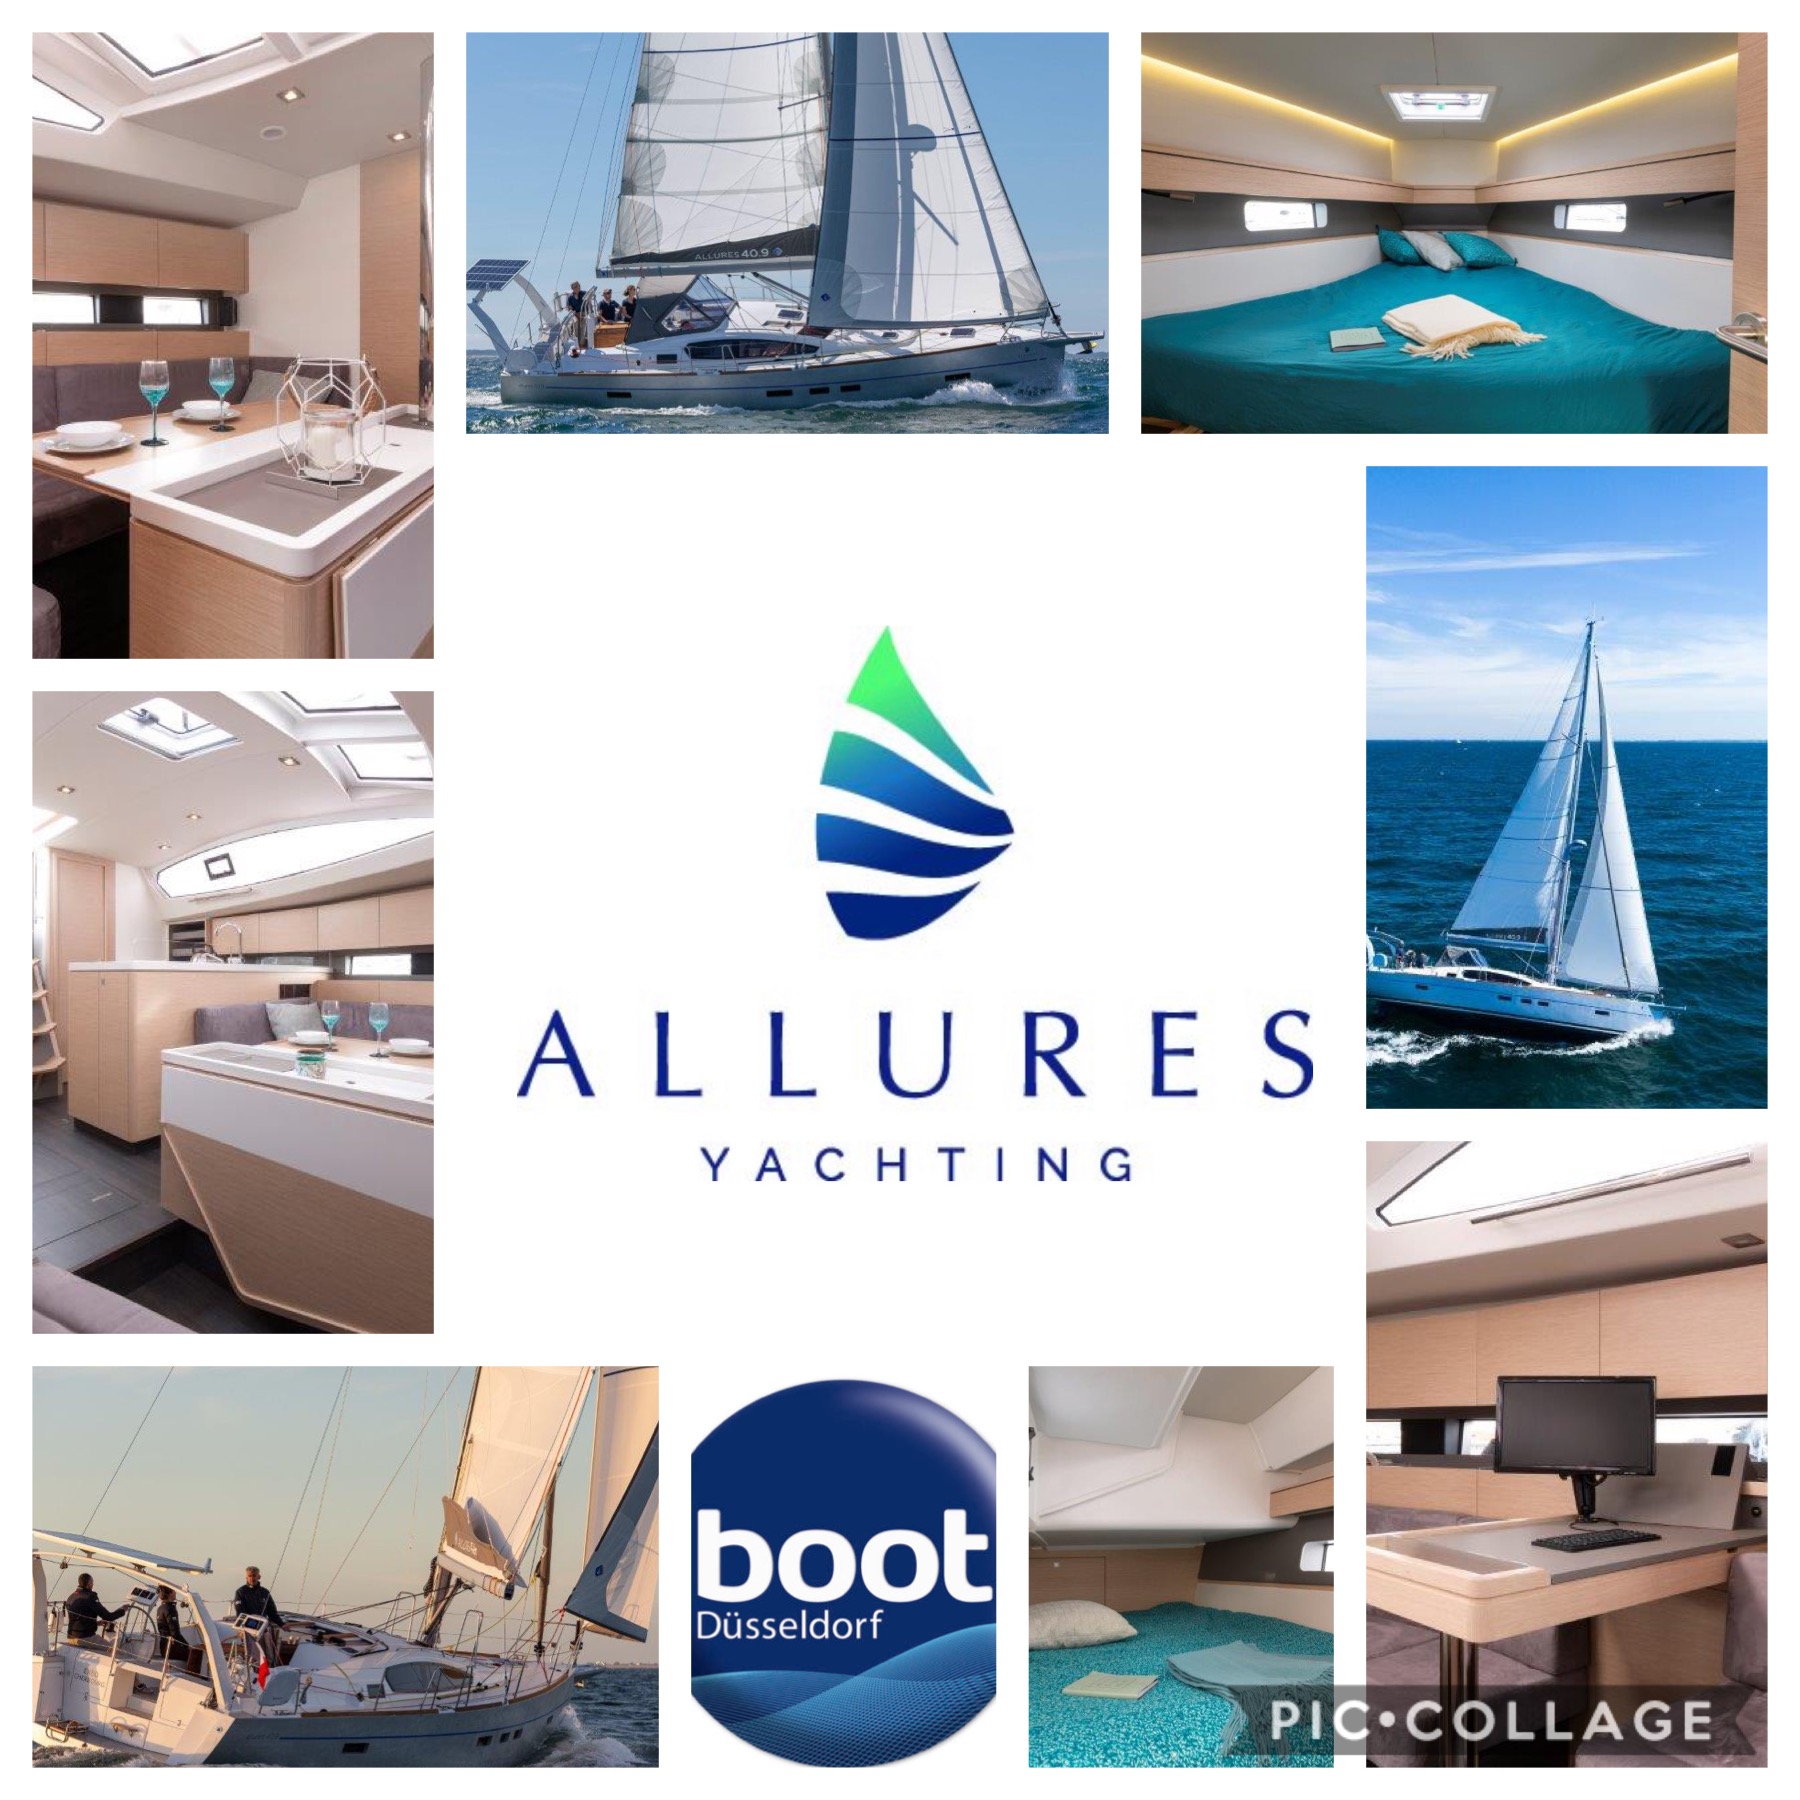 allures yachting recruitment